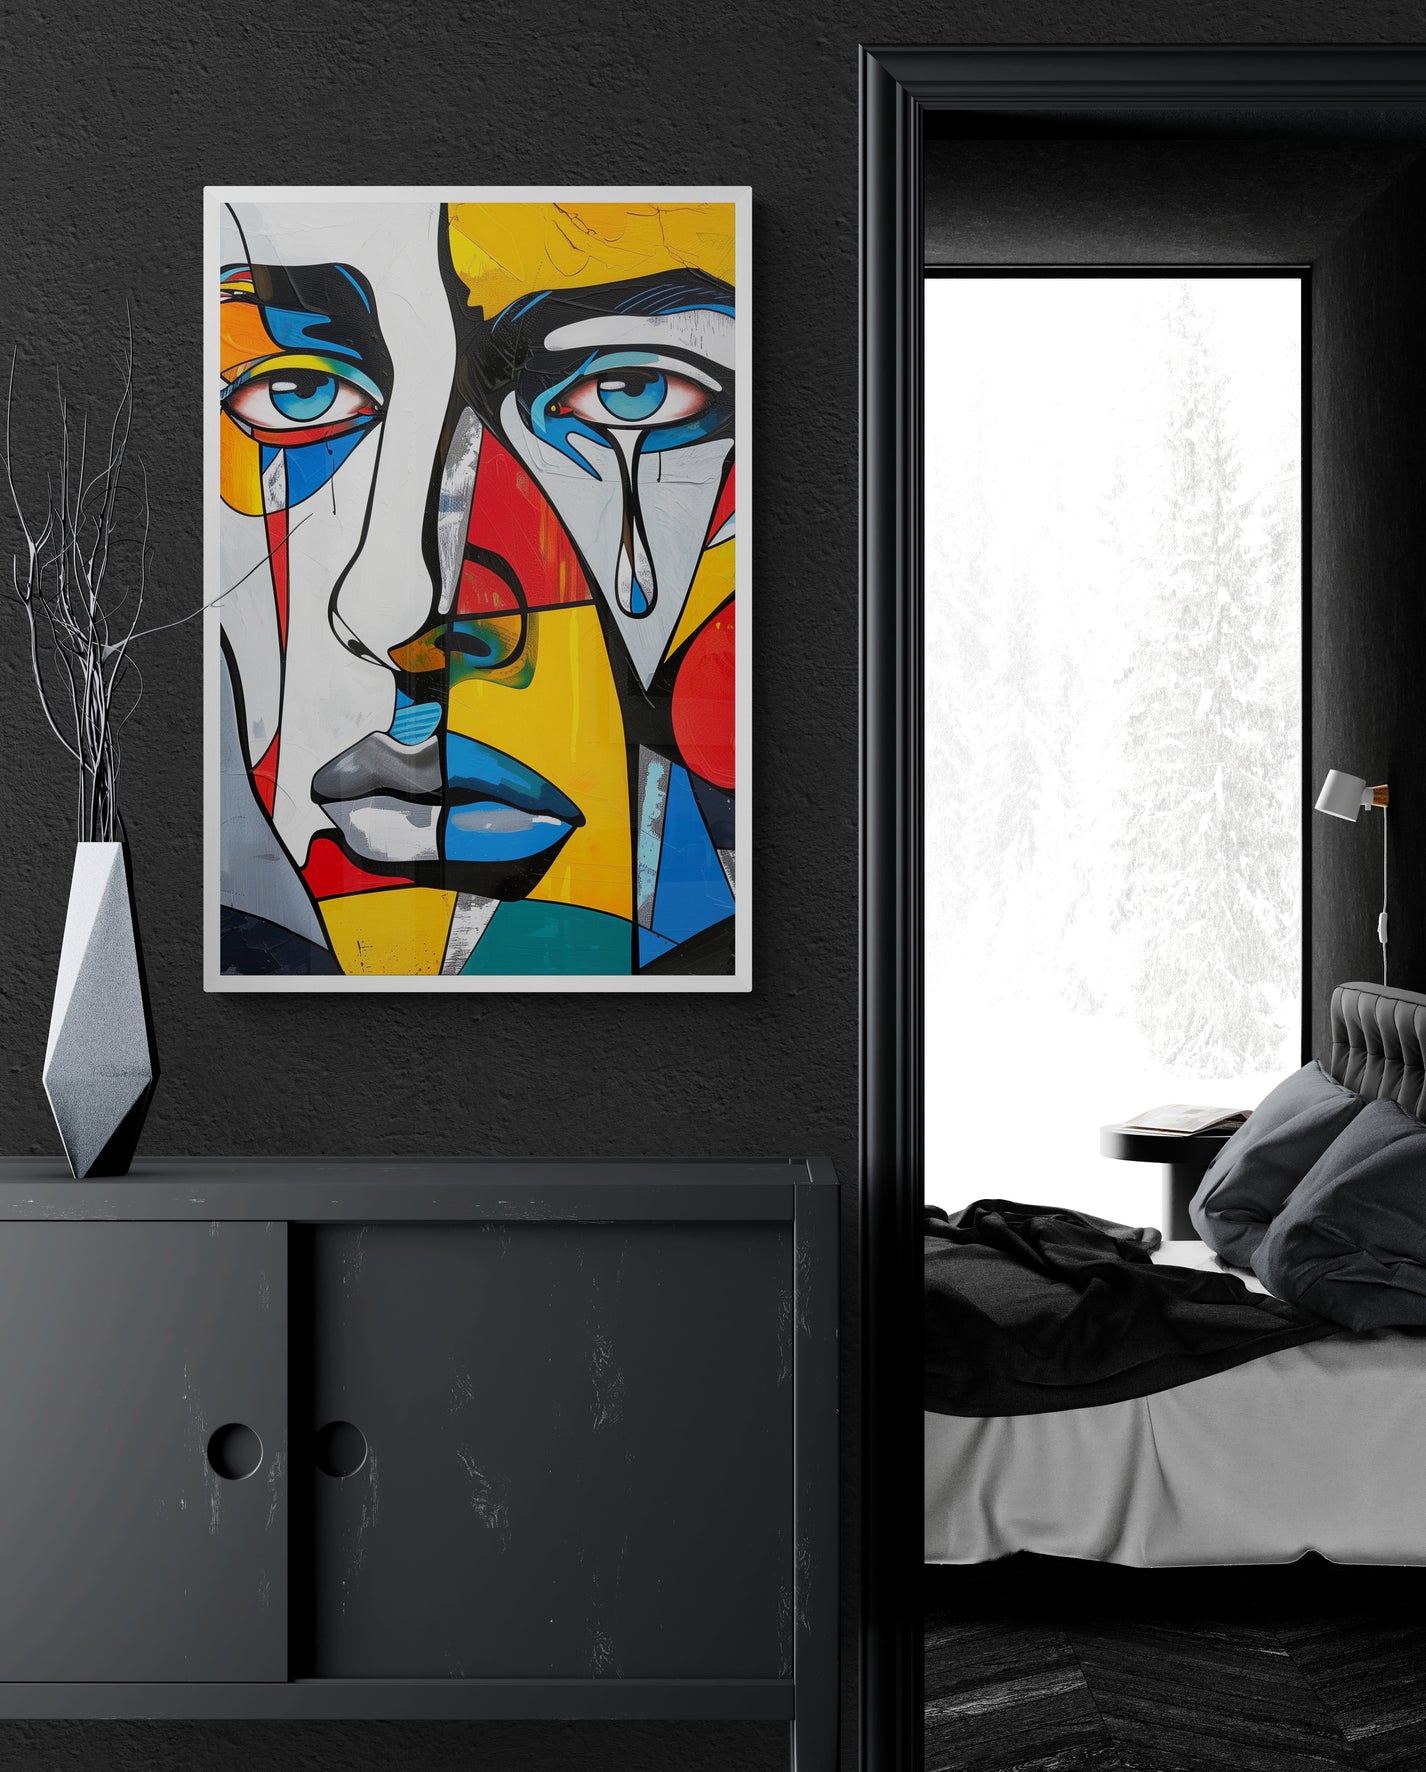 Abstract framed canvas print with bold colors and geometric shapes, depicting a face, by Milton Wes Art, showcased in a stylish bedroom setting and available for purchase